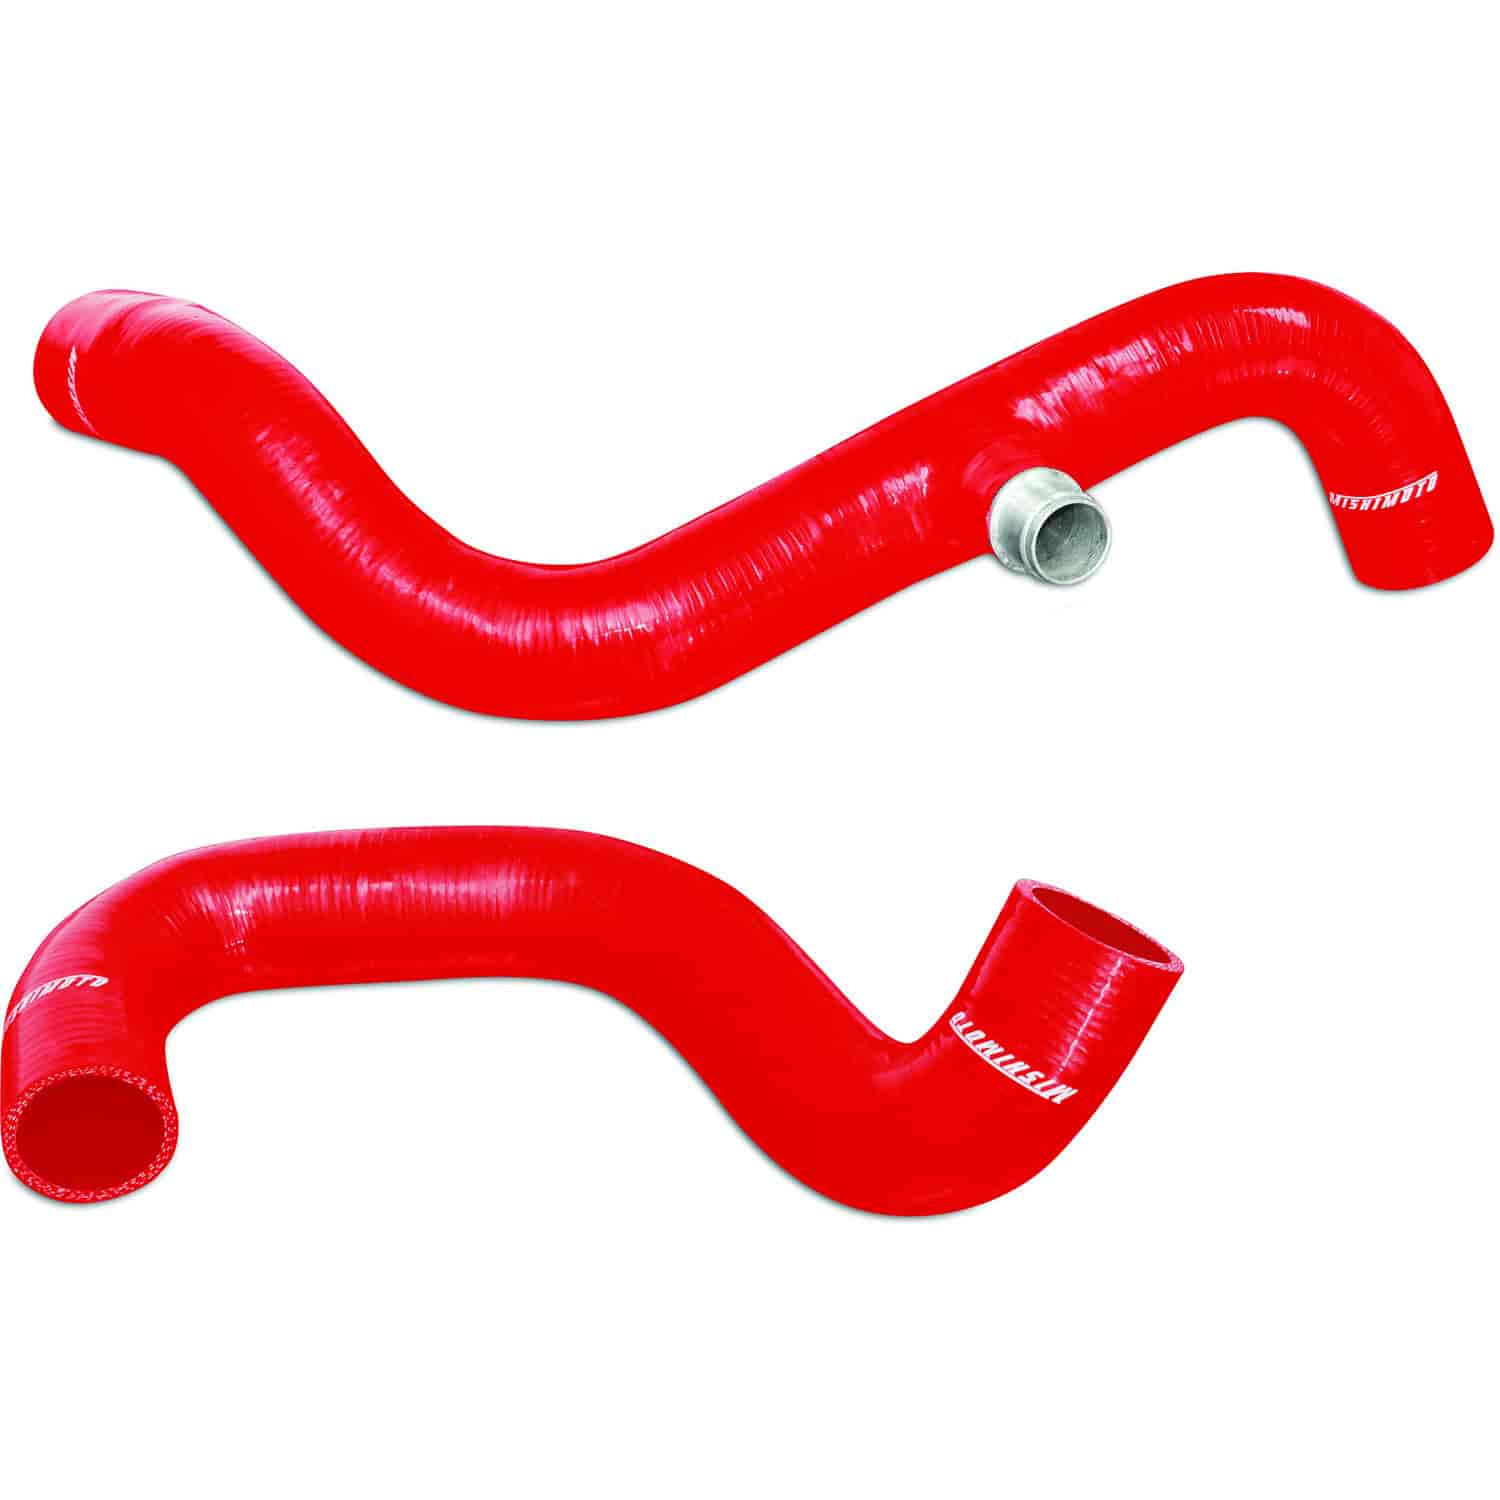 Ford 7.3L Powerstroke Silicone Coolant Hose Kit - MFG Part No. MMHOSE-F250D-94RD